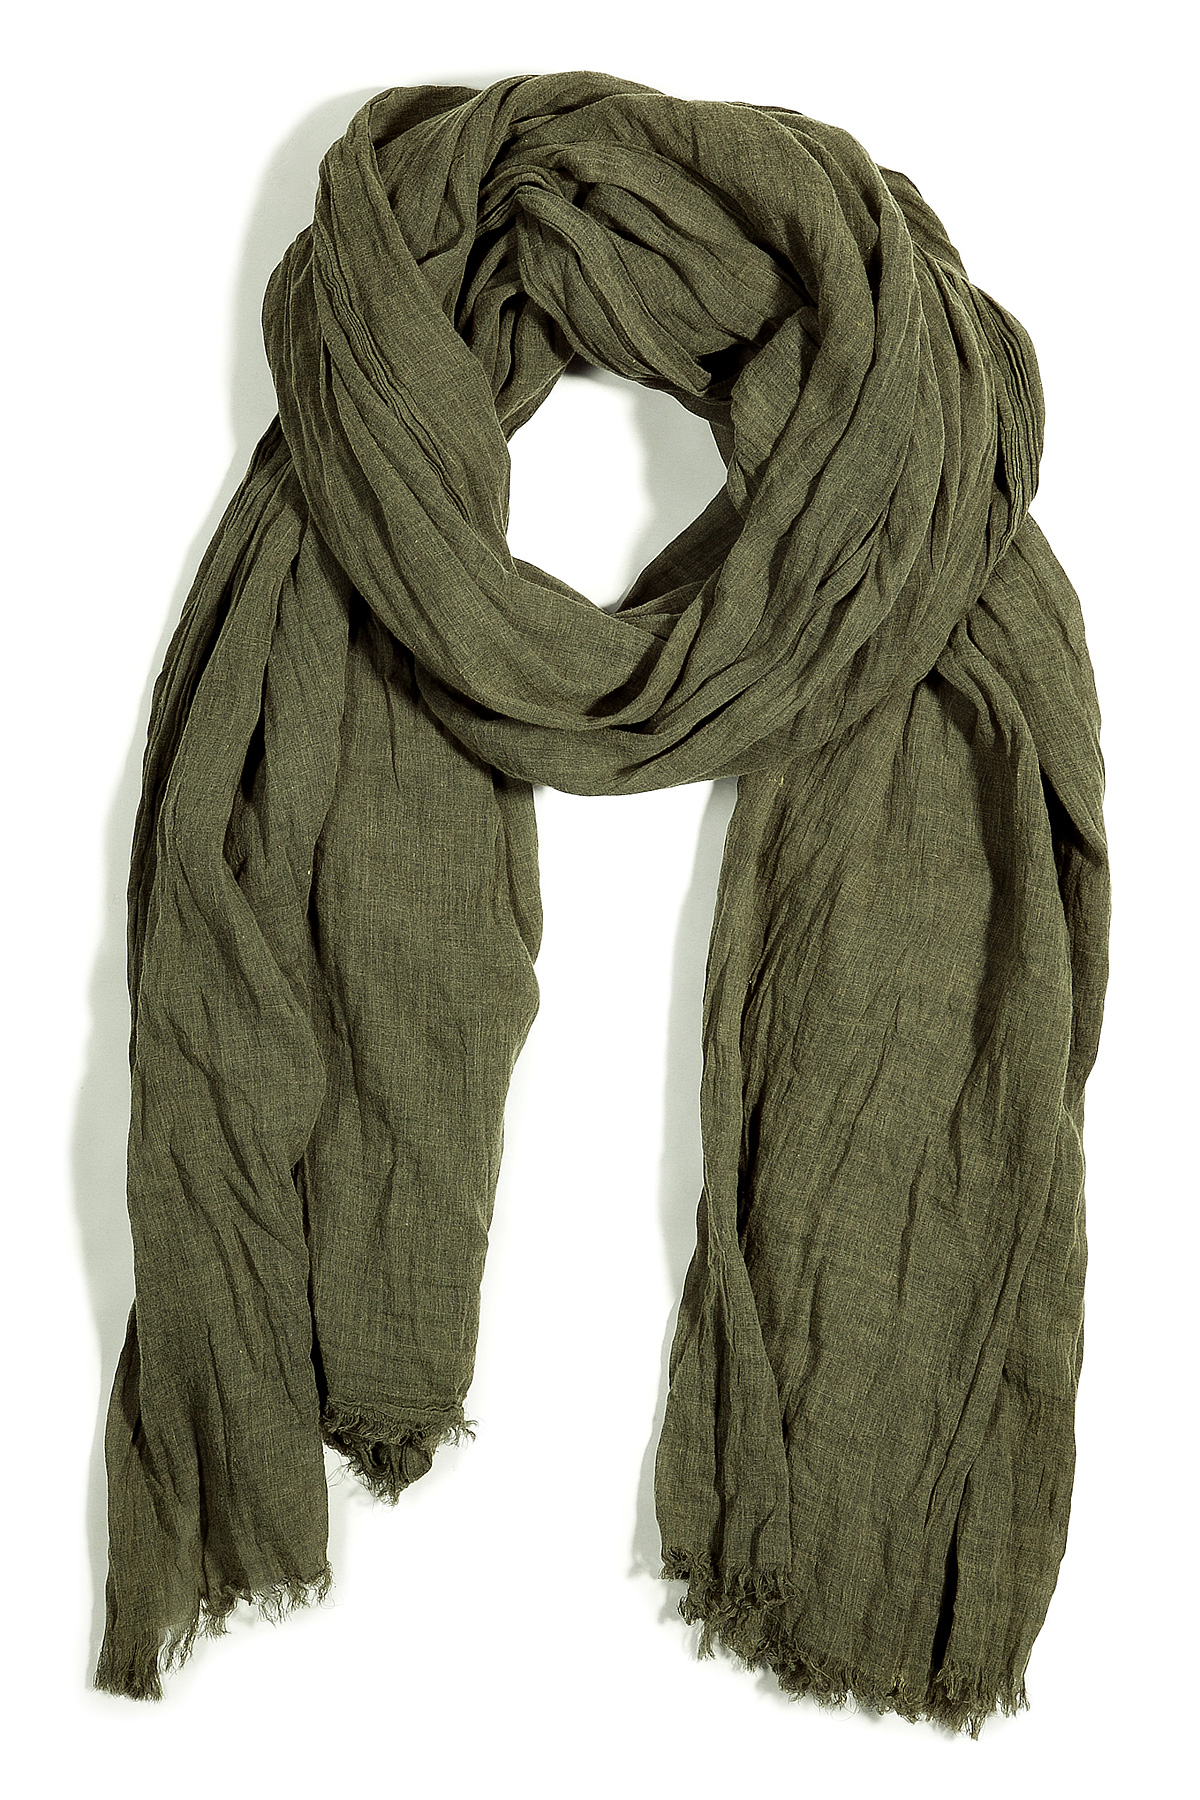 Lyst - Closed Military Olive Fringed Scarf in Green for Men